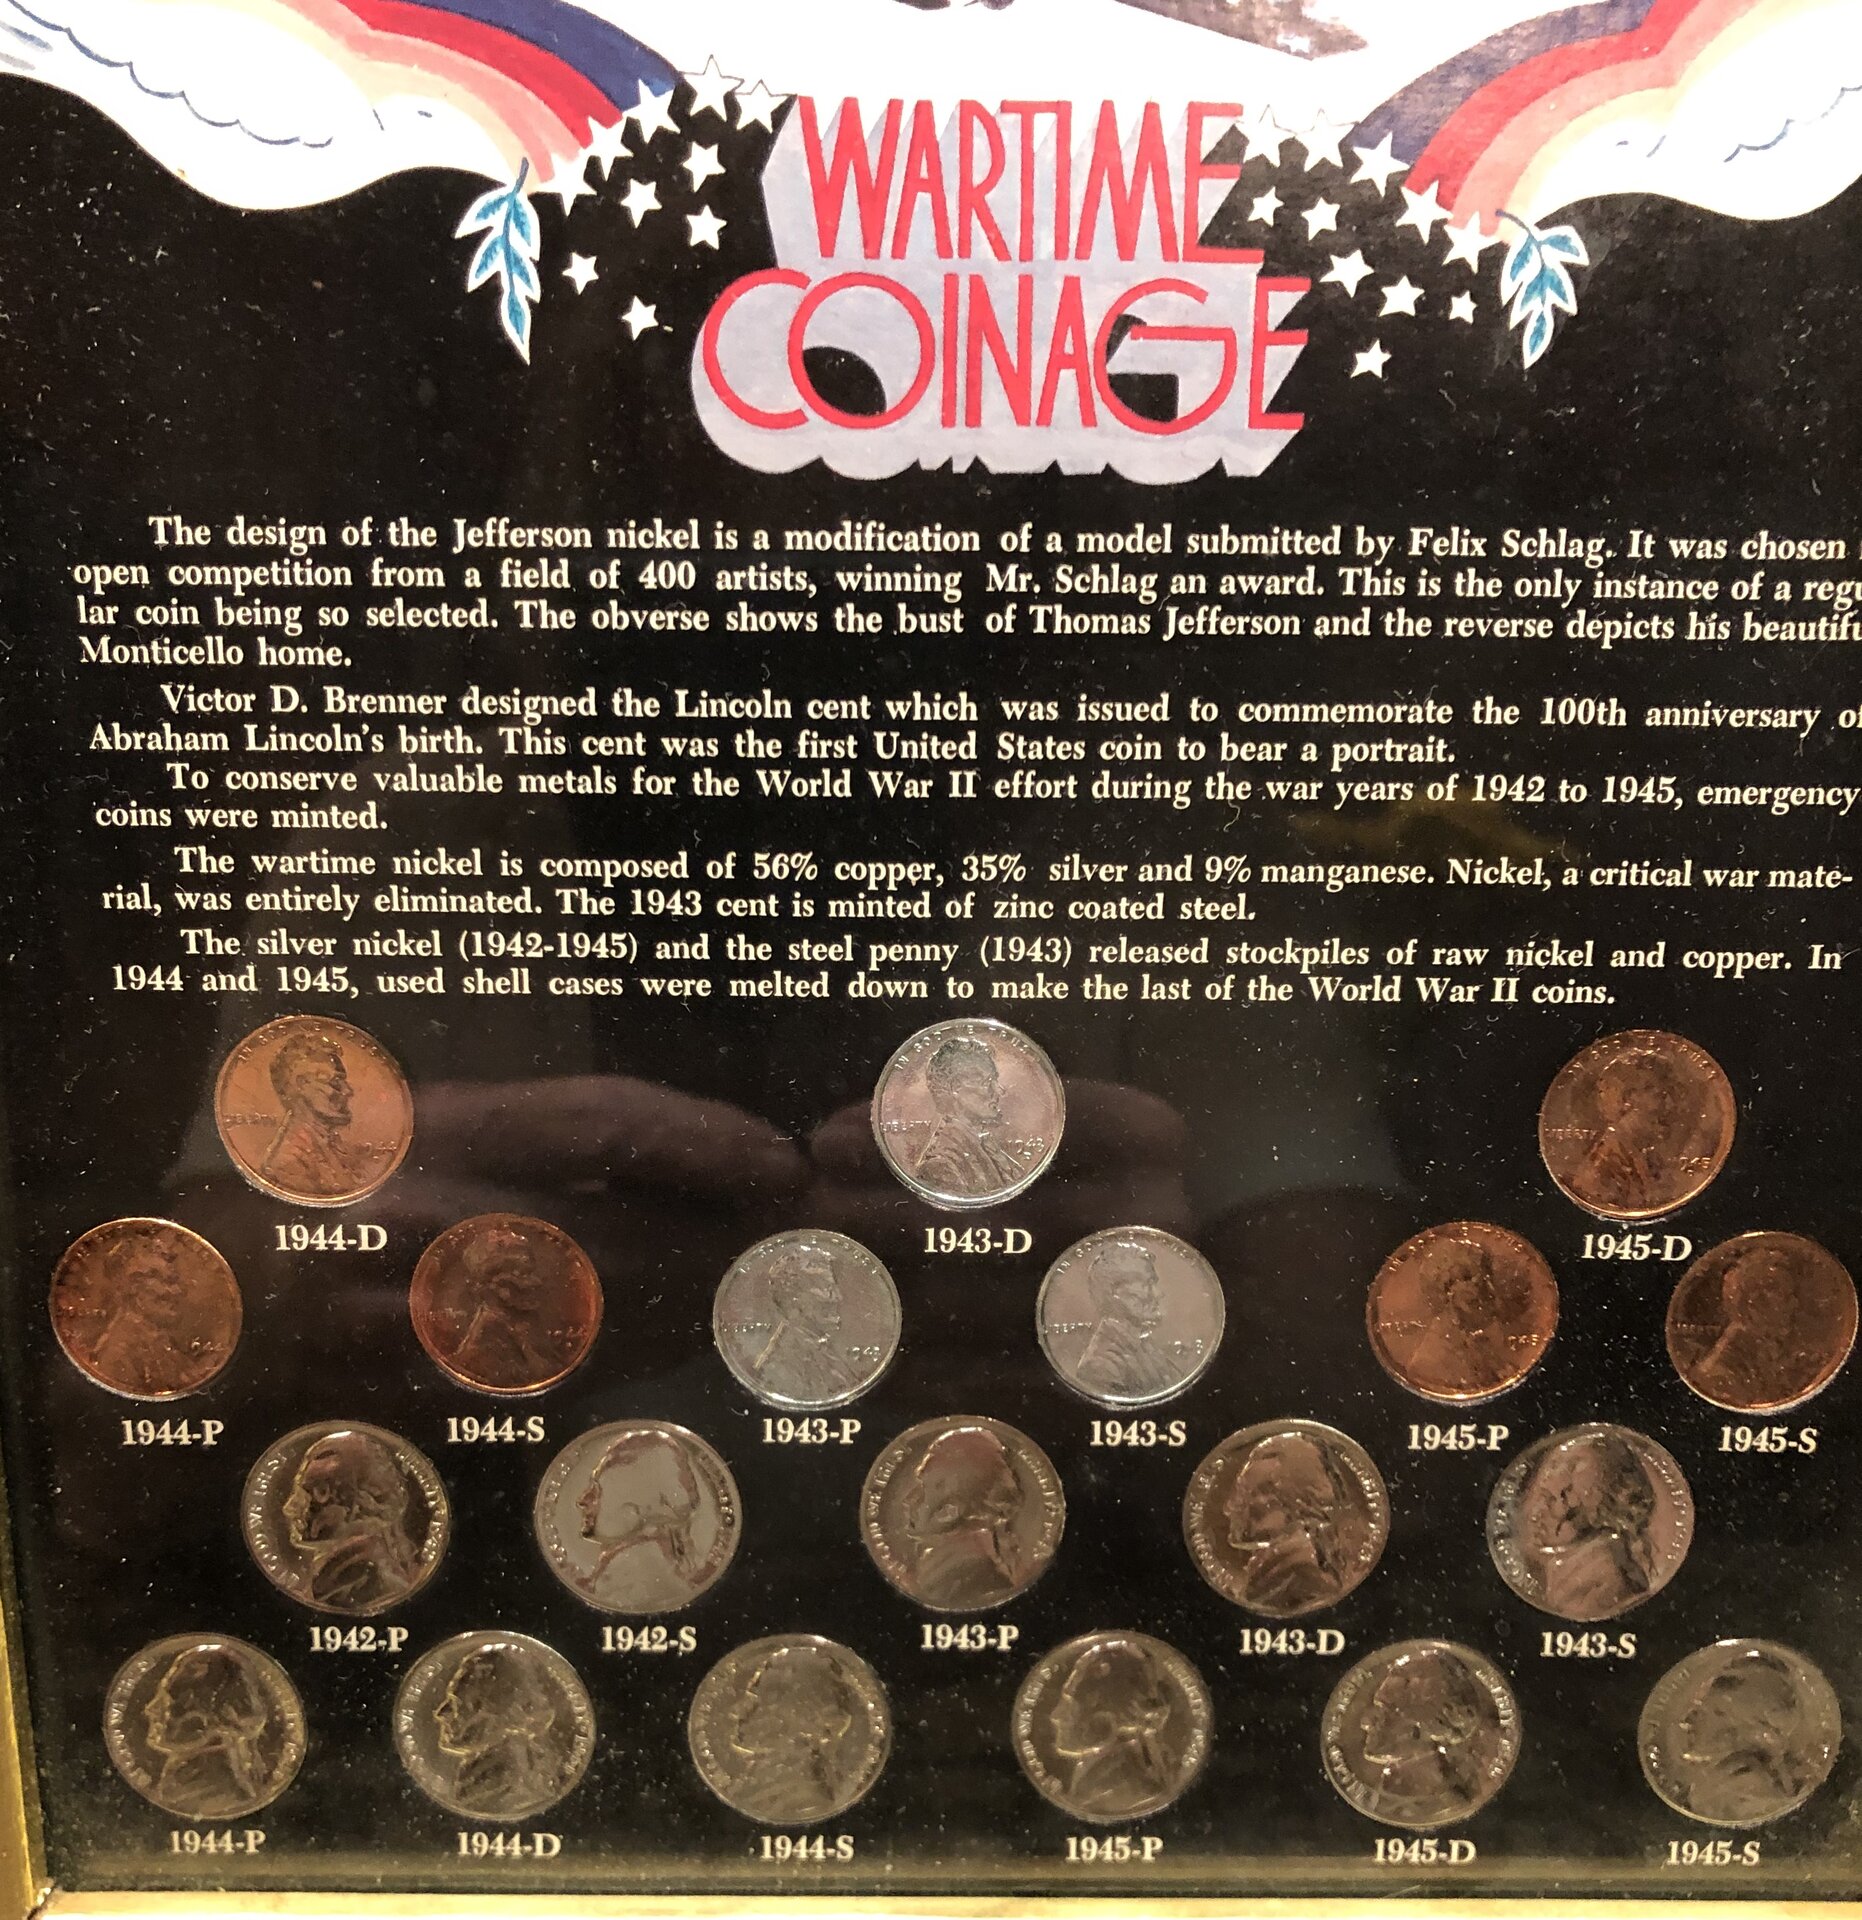 US Wartime Coinage-1.jpg